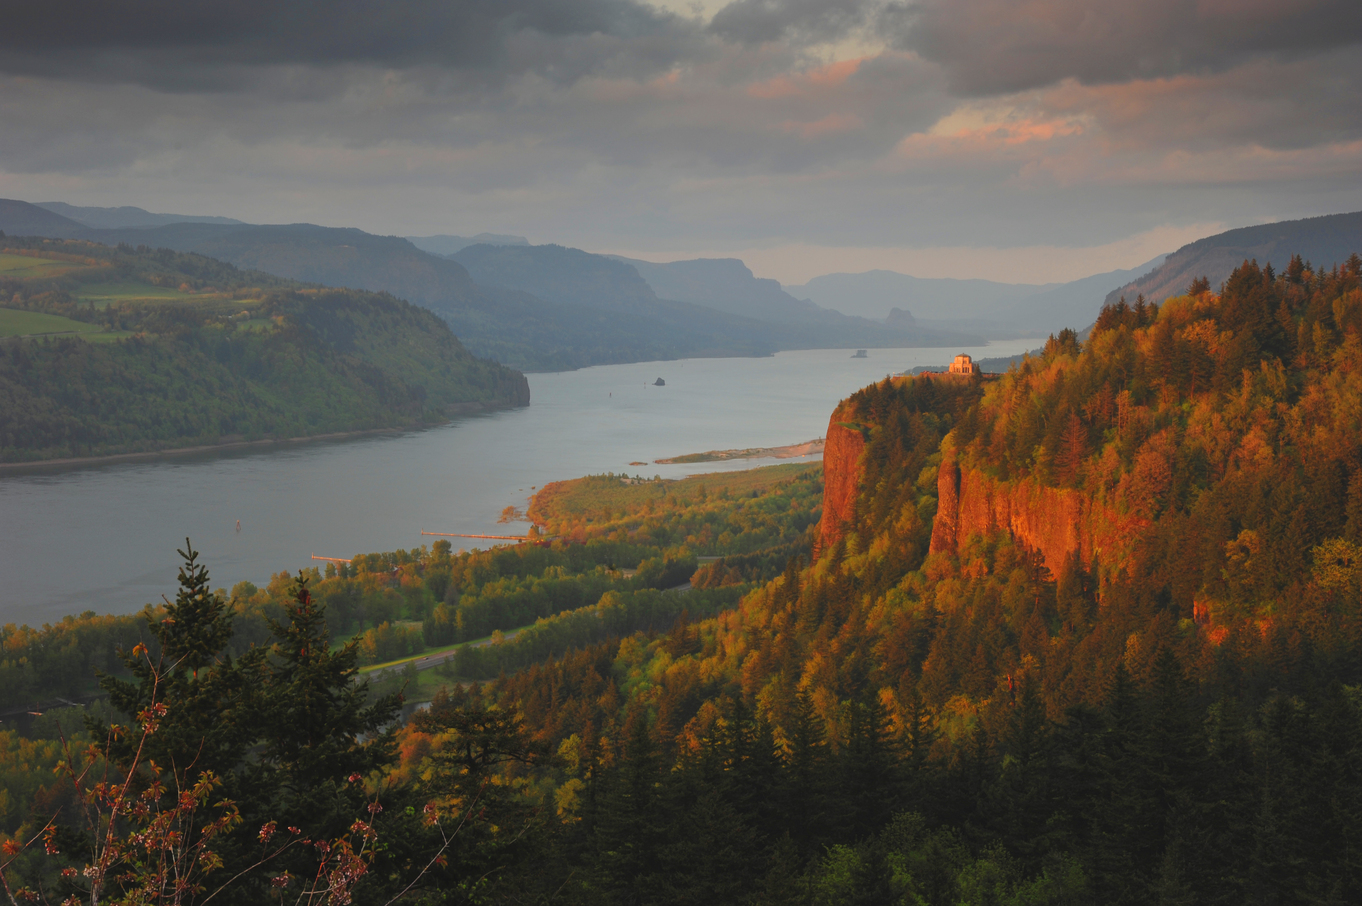 Columbia River Gorge Commission Monthly Meeting: December